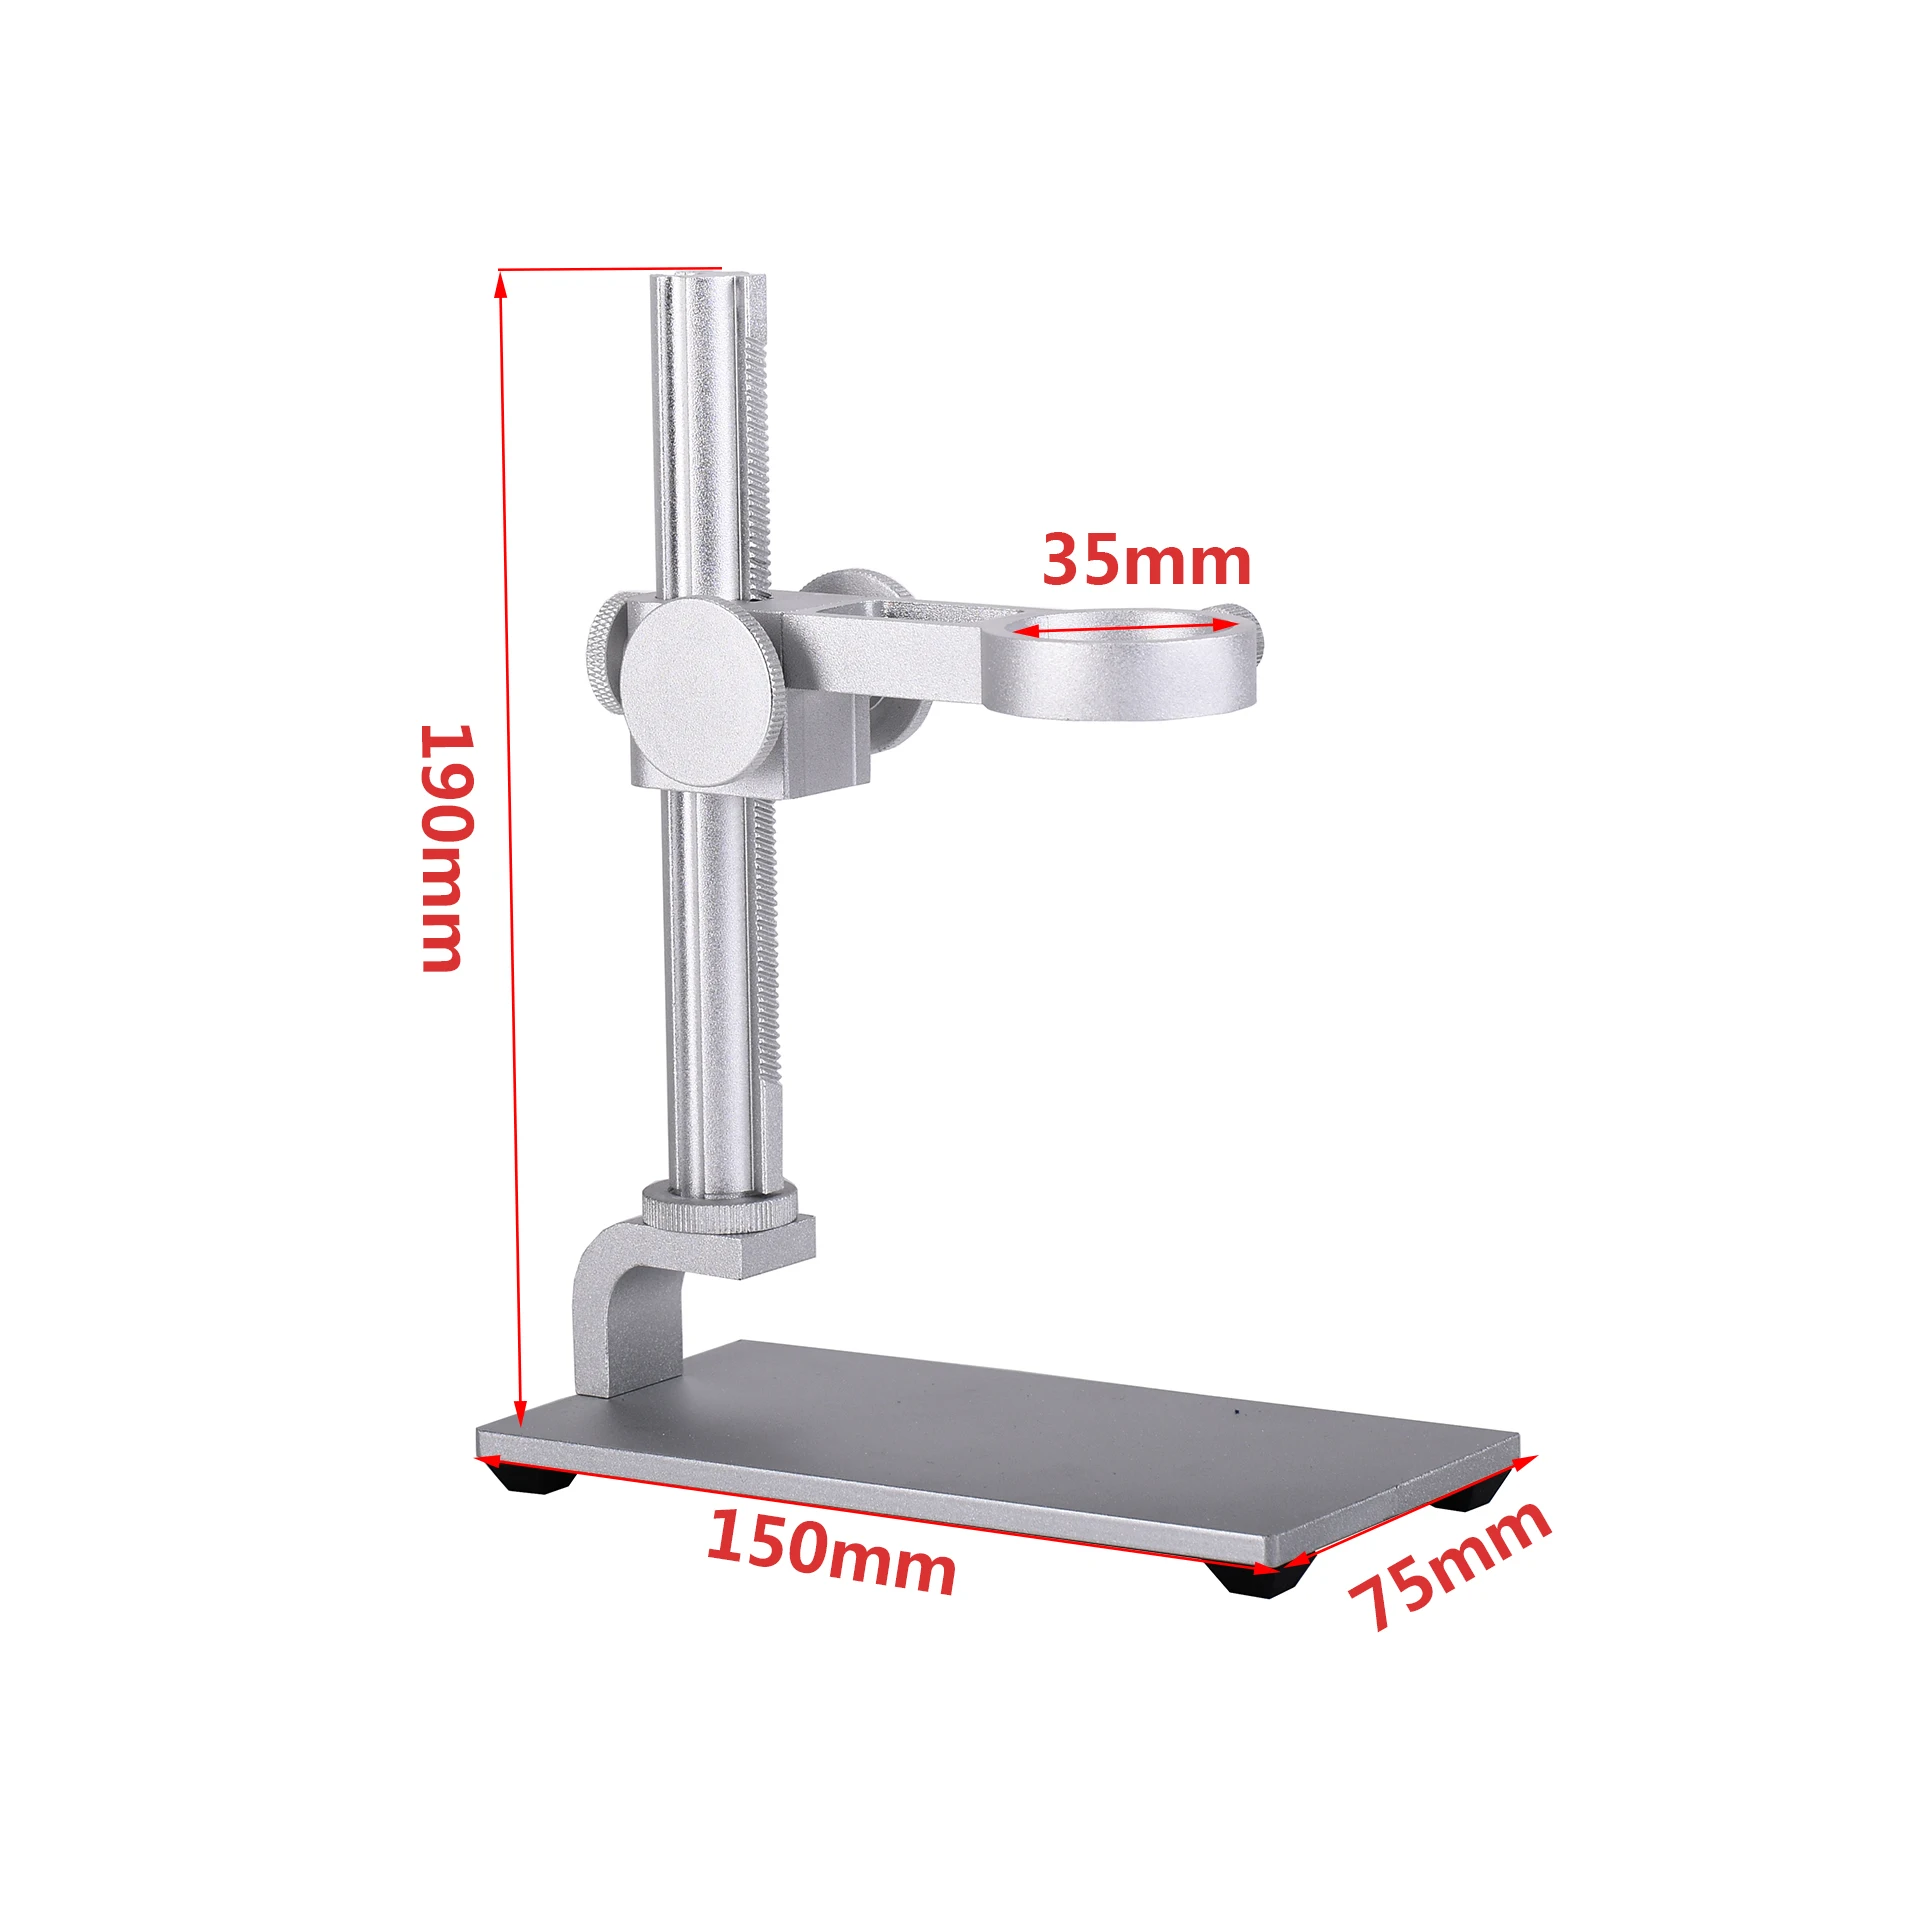 Aluminum Alloy Stand for Digital Microscope of USB/WiFi/LCD Camera Adjustable Height Maxmium 1.18 Inch Diameter w/Dual Fill Light Universal Metal Stand Holder